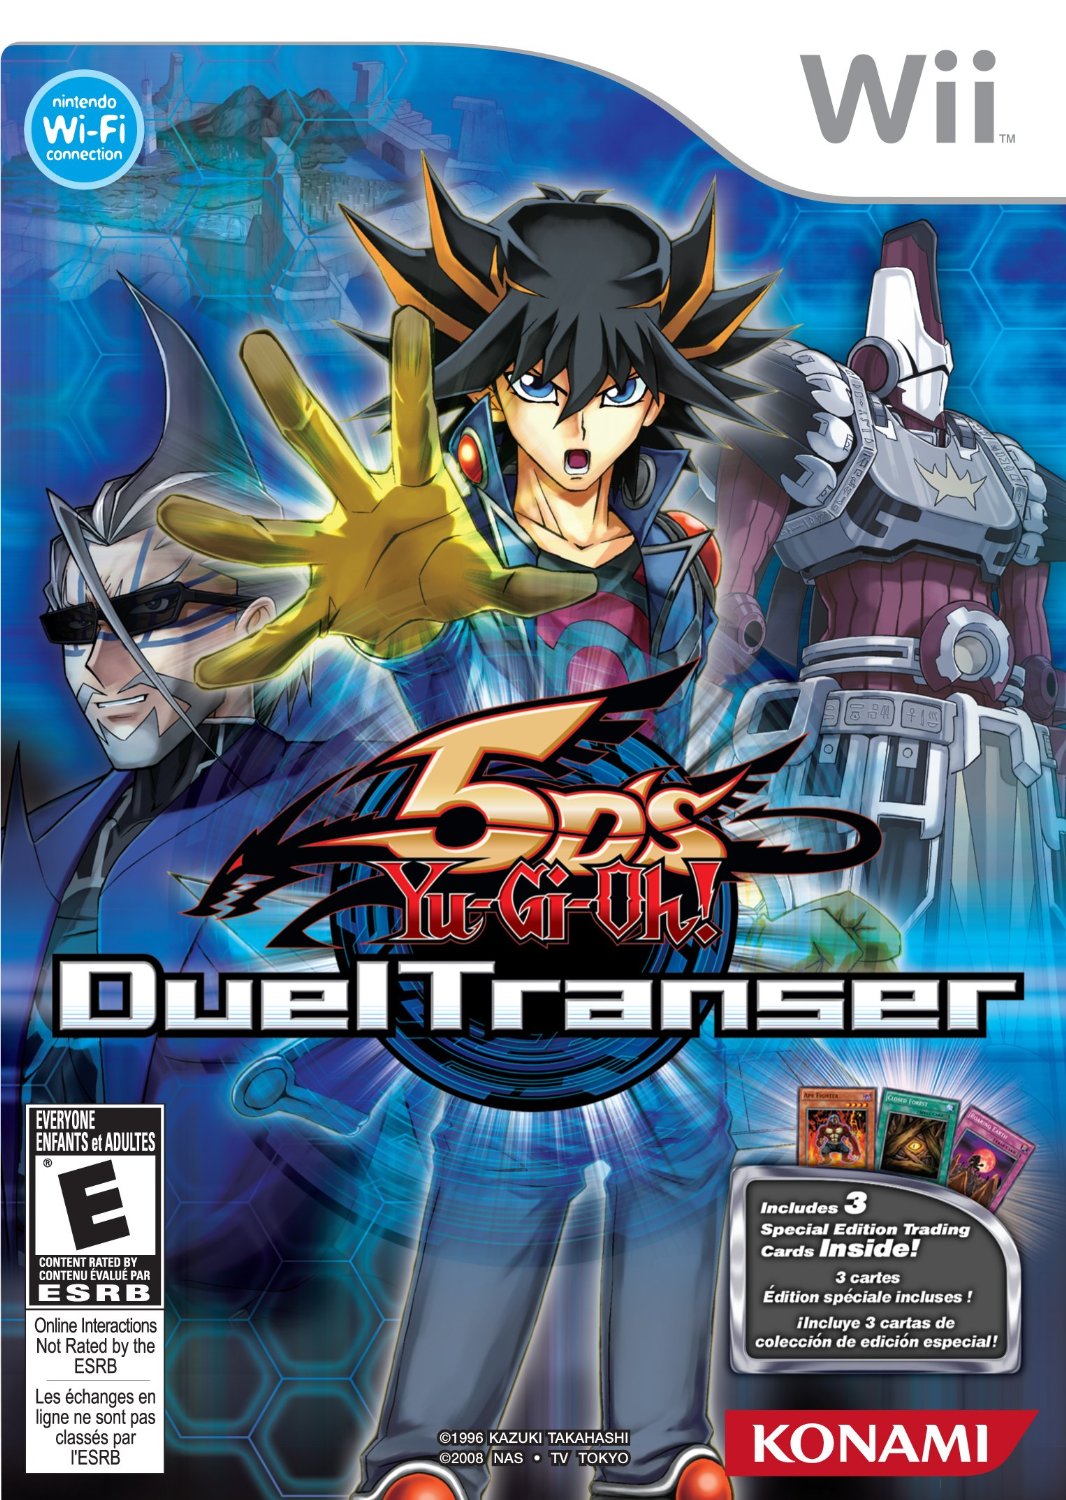 Yu Gi Oh! 5D's Duel Transfer/Wii